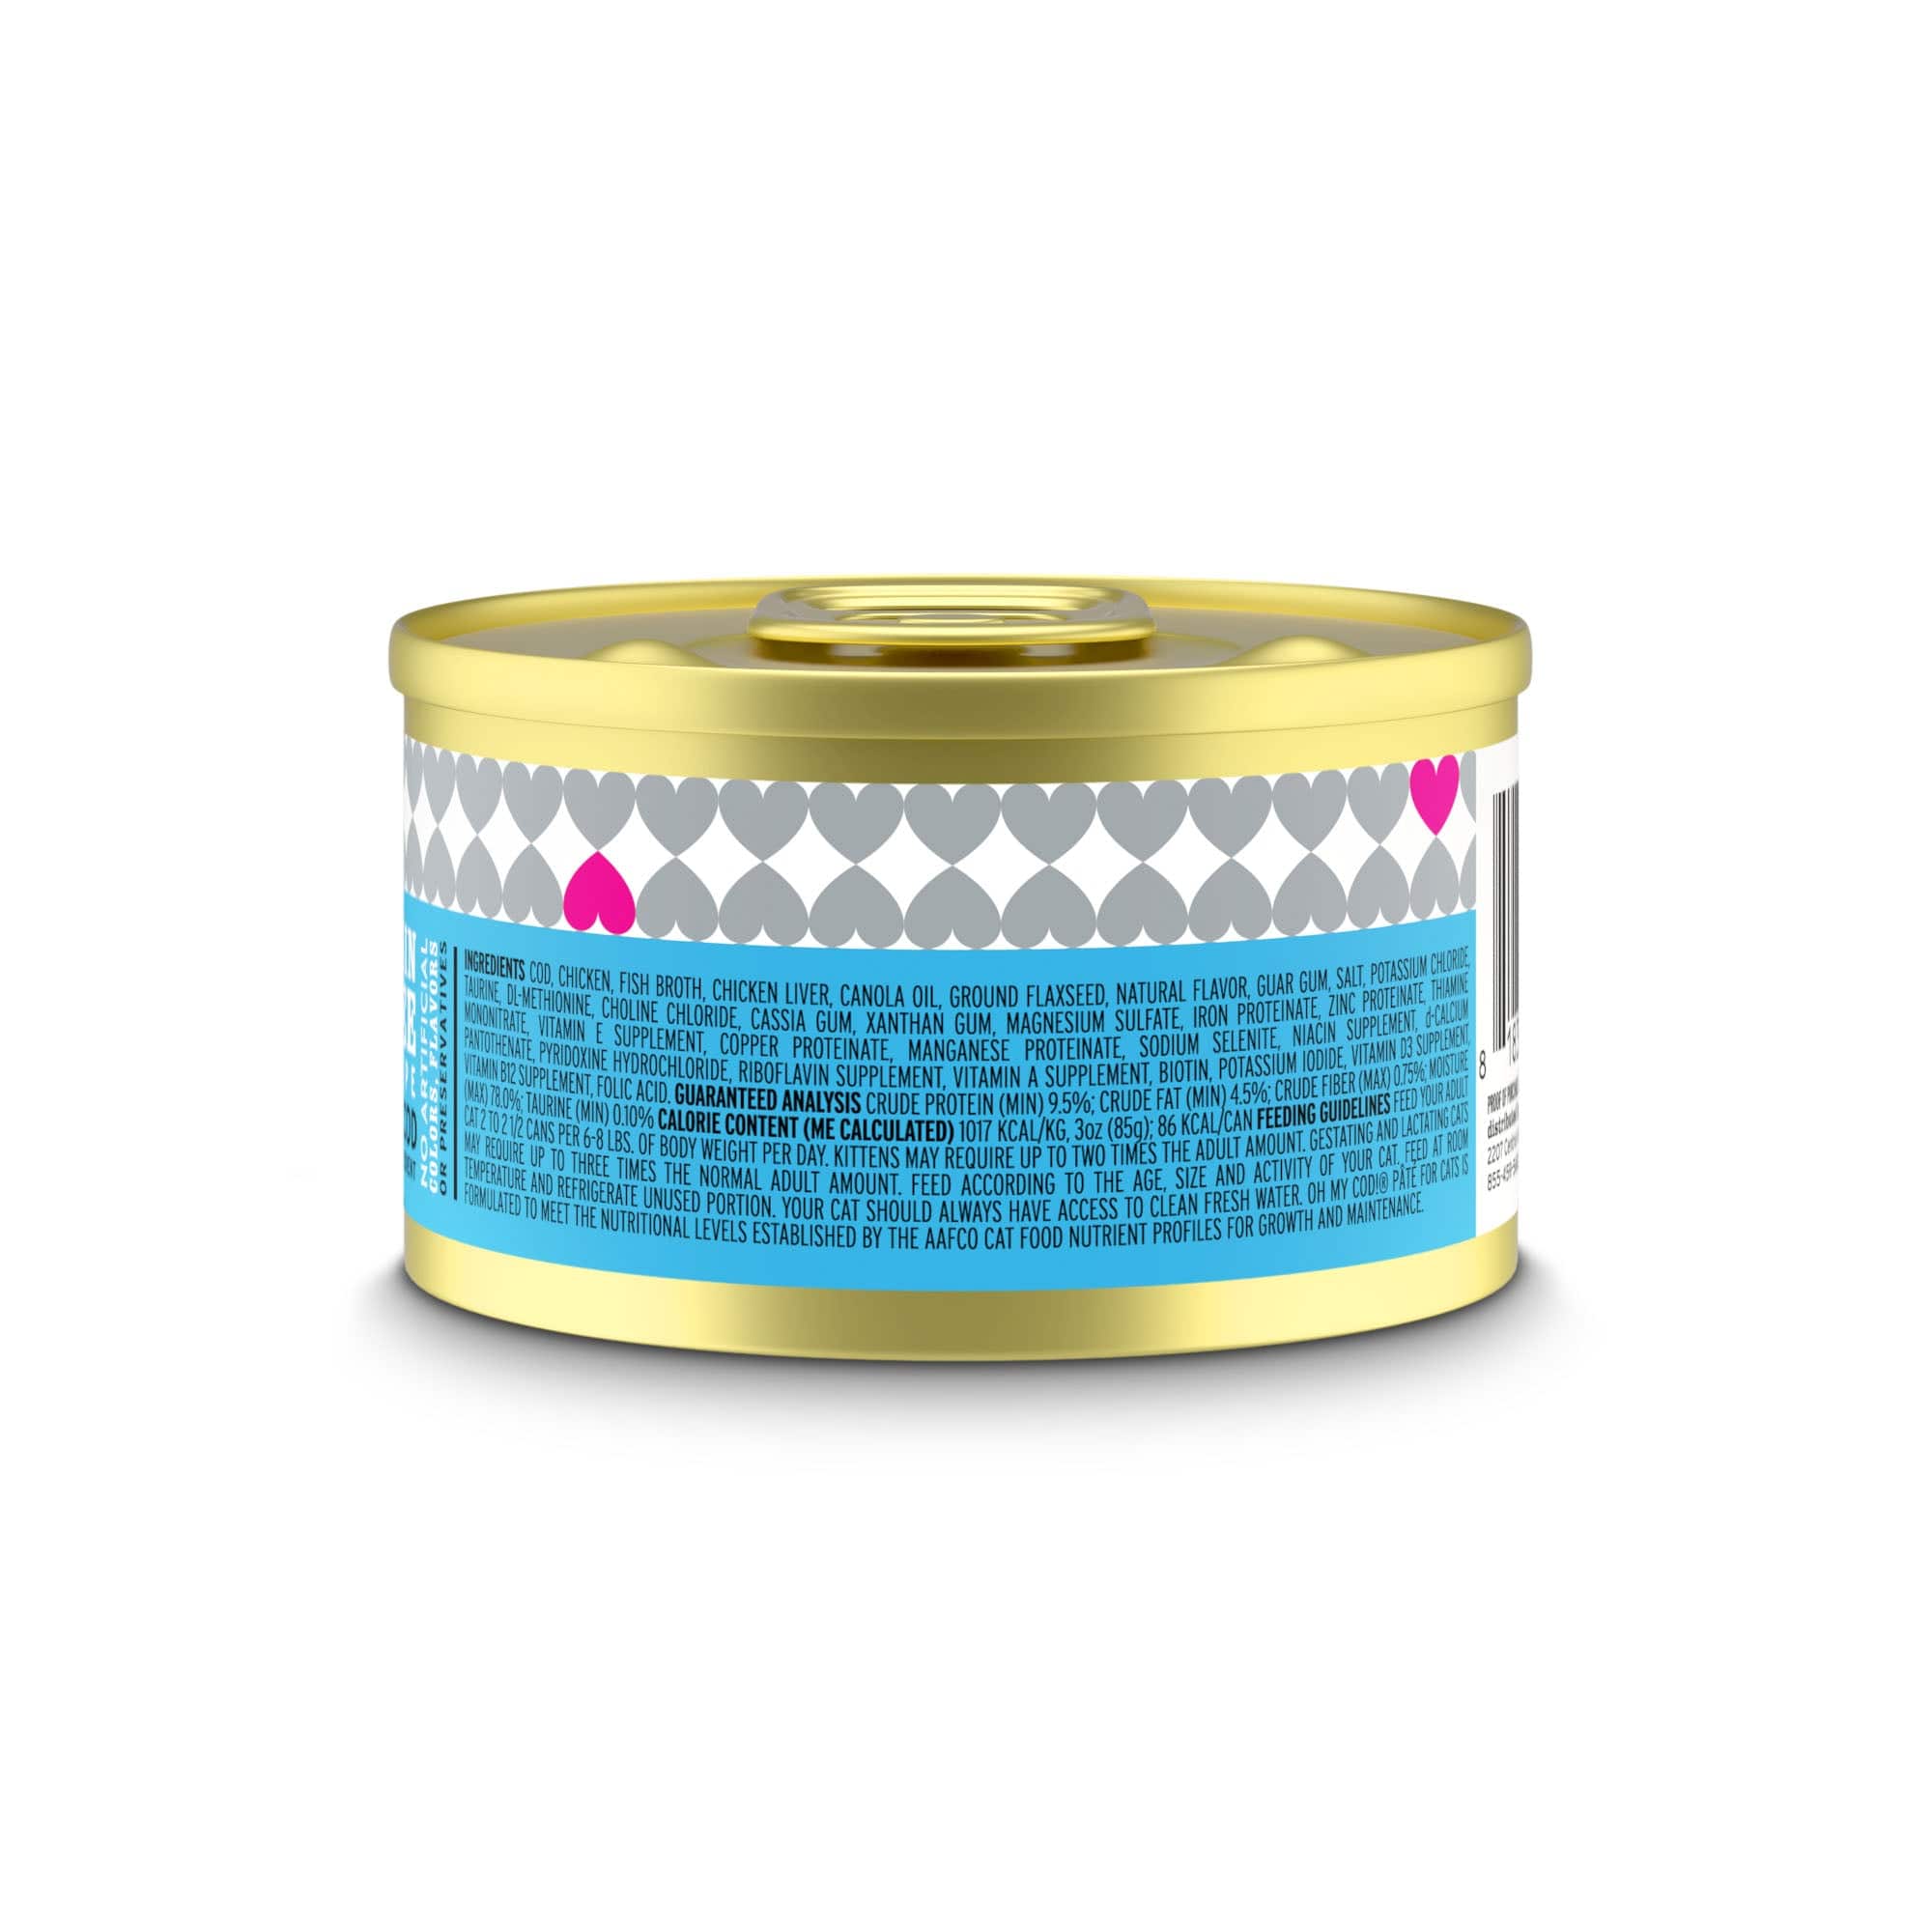 A close-up of a can of Oh My Cod! Pâté cat food with a label and lid, showcasing a gold object and heart shapes.